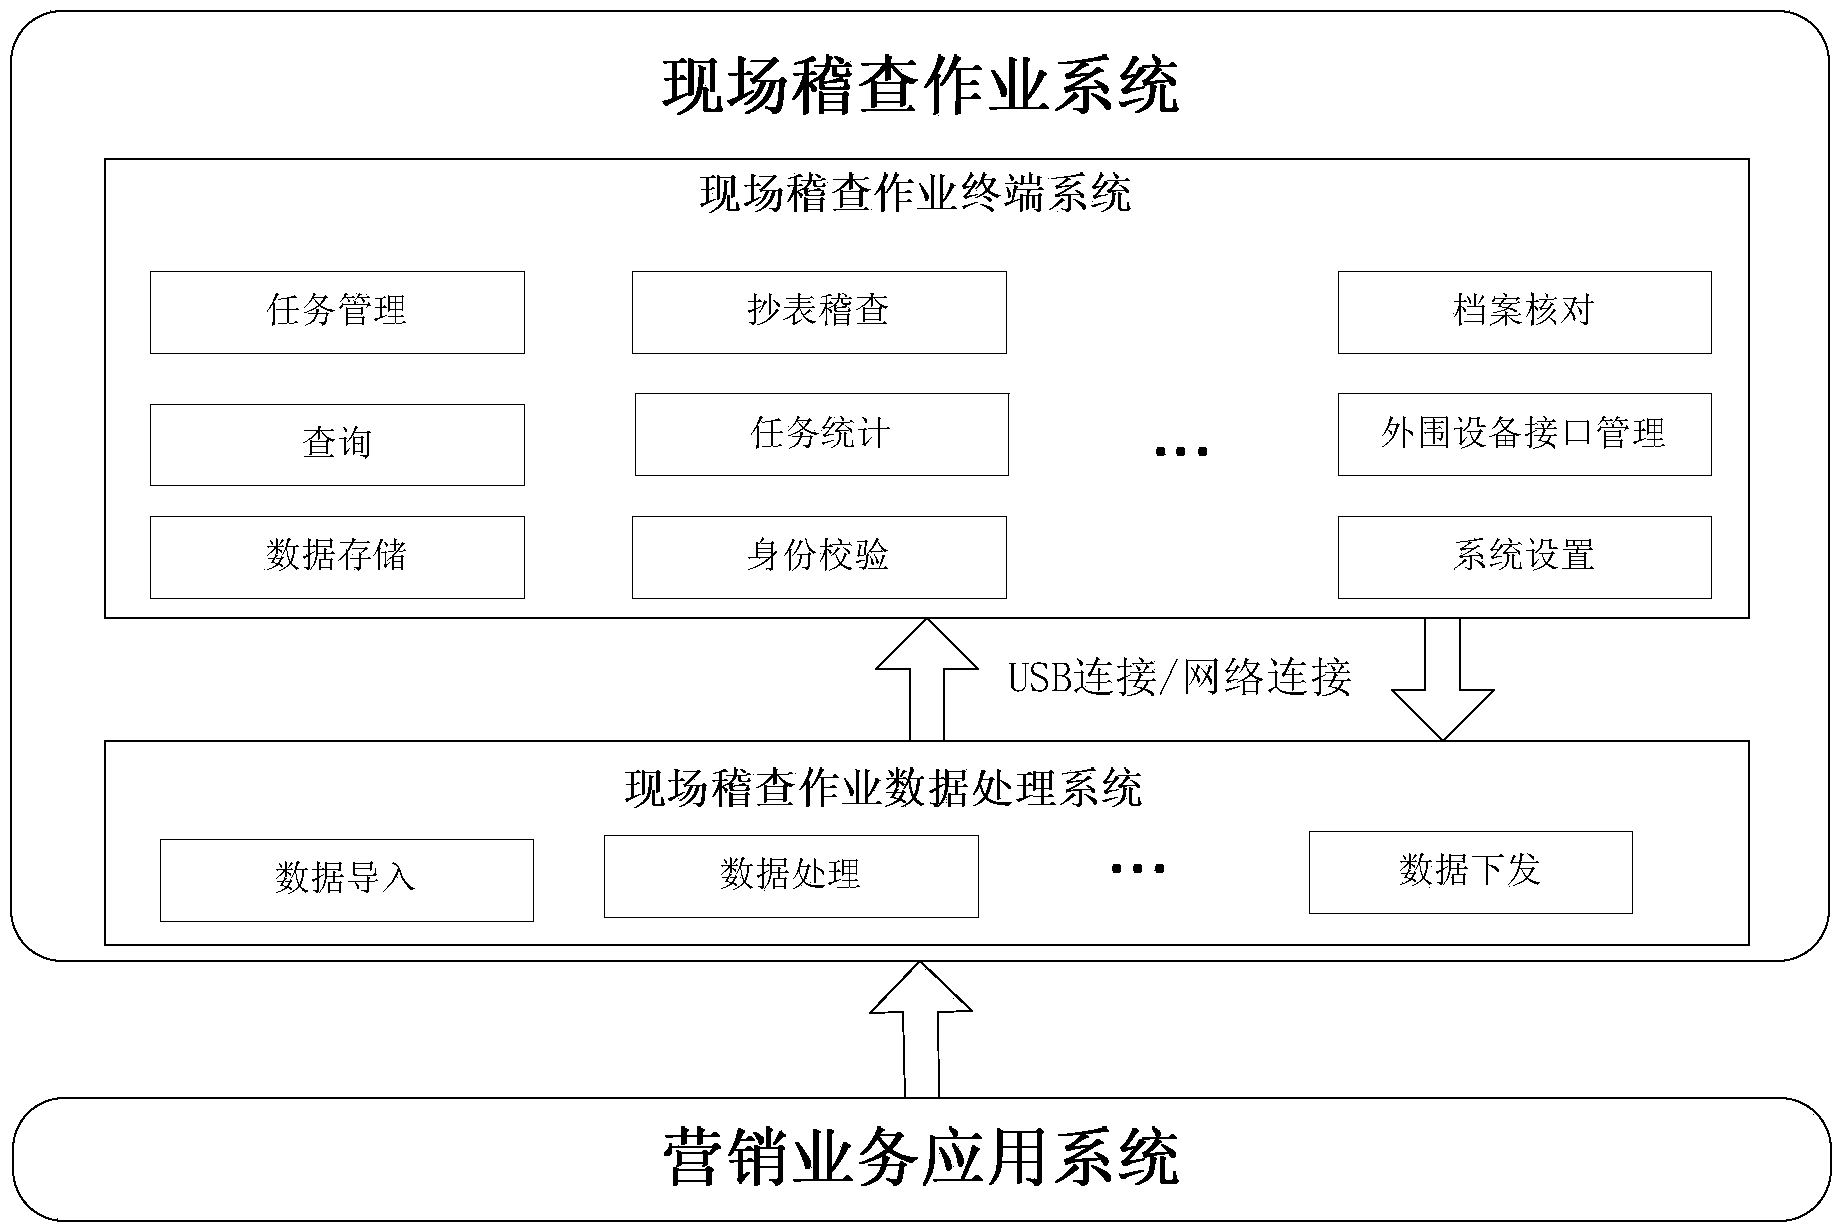 Data application processing system, handhold terminal and on-site checking data processing system